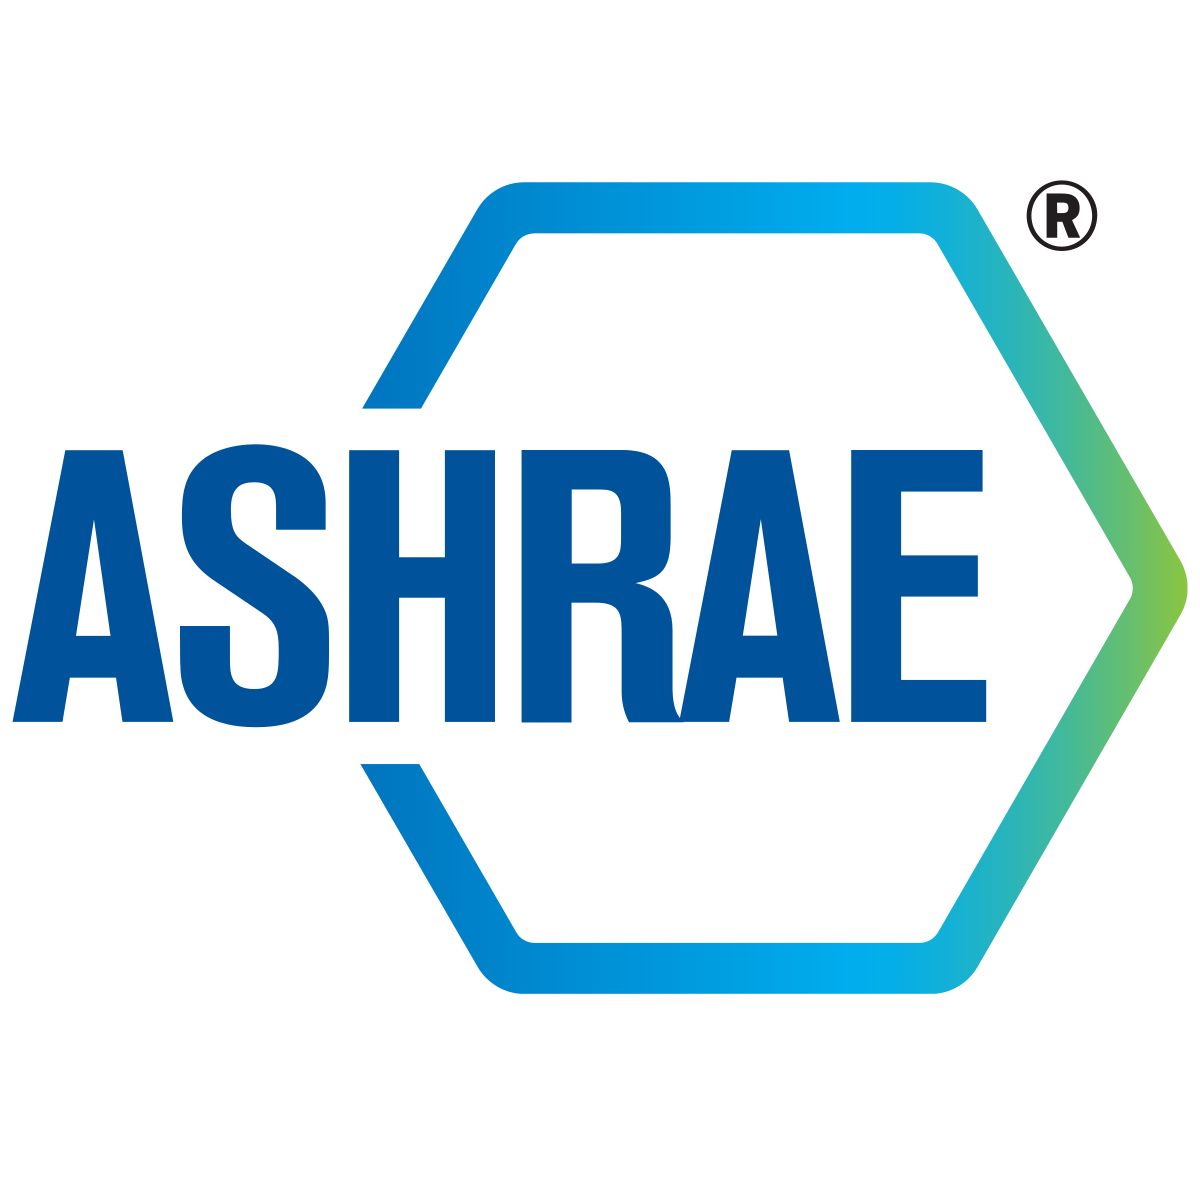 American Society of Heating Refrigeration and Air-Conditioning Engineers (ASHRAE)